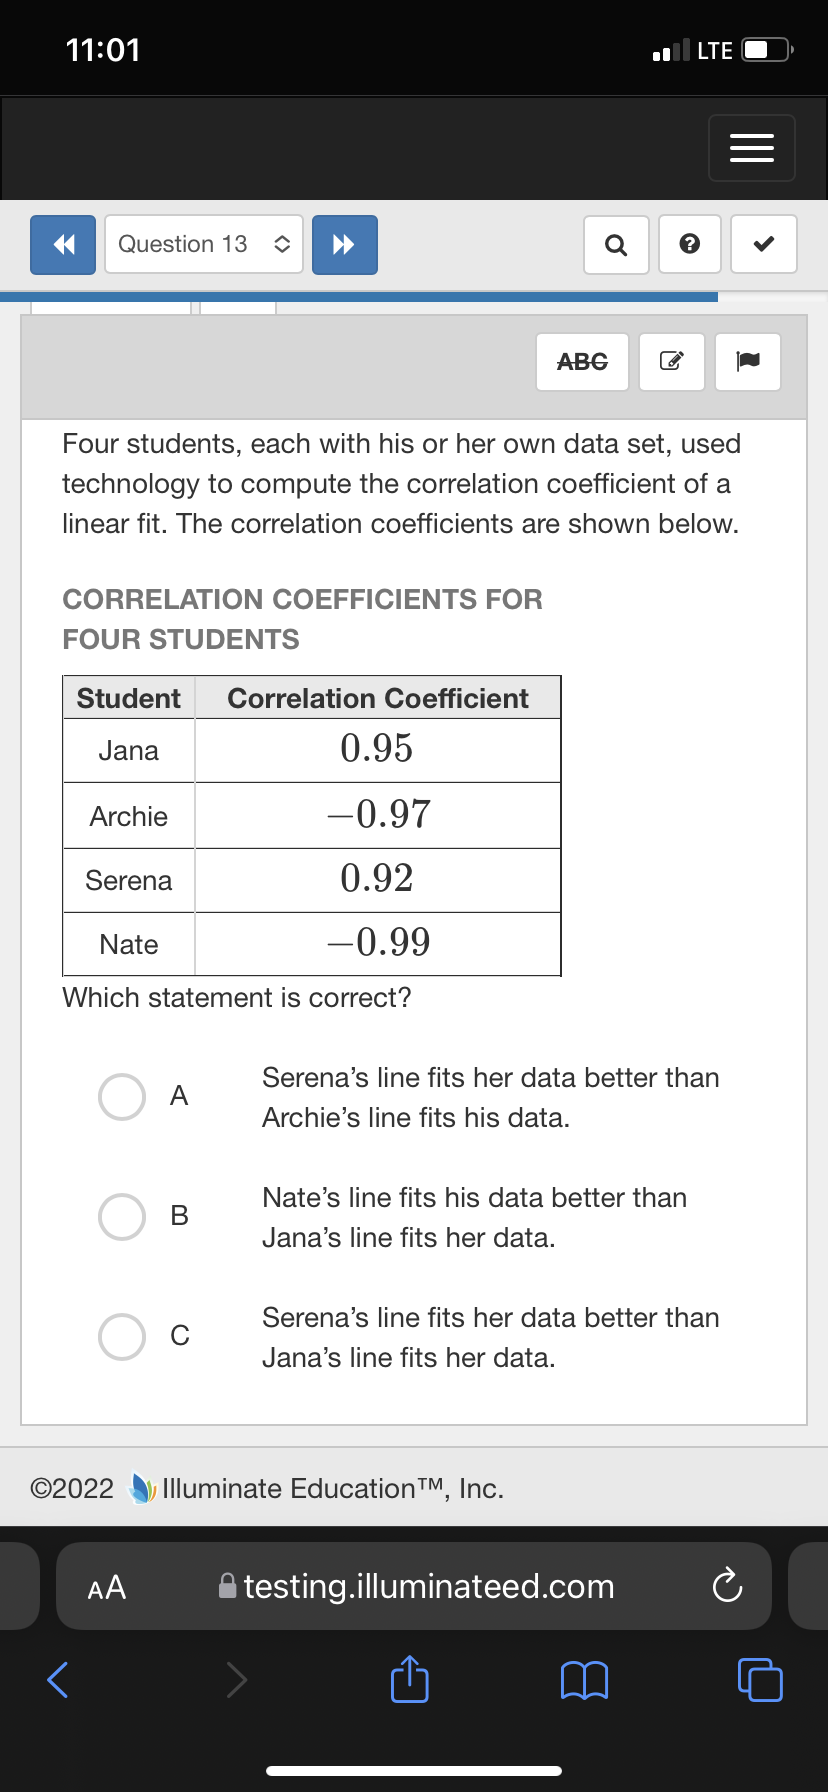 11:01
LTE
Question 13
Q
АBG
Four students, each with his or her own data set, used
technology to compute the correlation coefficient of a
linear fit. The correlation coefficients are shown below.
CORRELATION COEFFICIENTS FOR
FOUR STUDENTS
Student
Correlation Coefficient
Jana
0.95
Archie
-0.97
Serena
0.92
Nate
-0.99
Which statement is correct?
Serena's line fits her data better than
A
Archie's line fits his data.
Nate's line fits his data better than
В
Jana's line fits her data.
Serena's line fits her data better than
Jana's line fits her data.
©2022
Illuminate EducationTM, Inc.
AA
testing.illuminateed.com
<>
